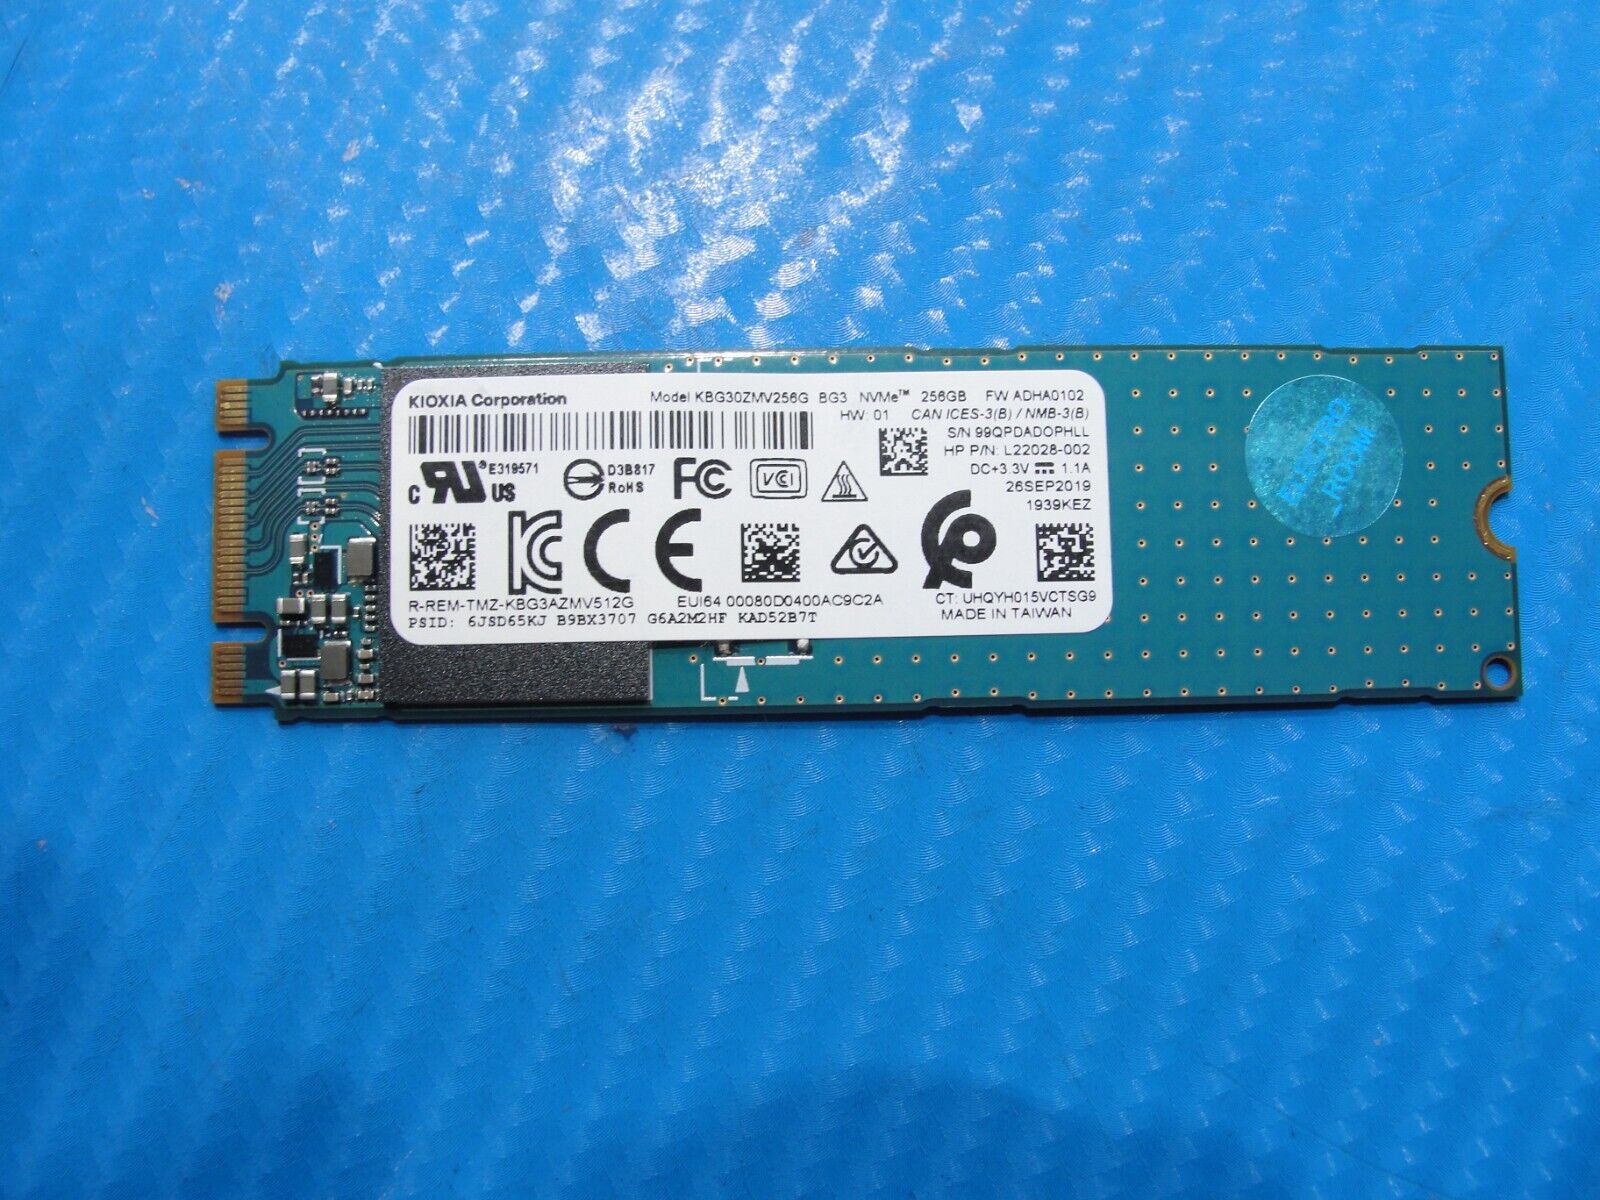 HP 15-cp0053cl Kioxia 256GB NVMe M.2 SSD Solid State Drive KBG30ZMV256G